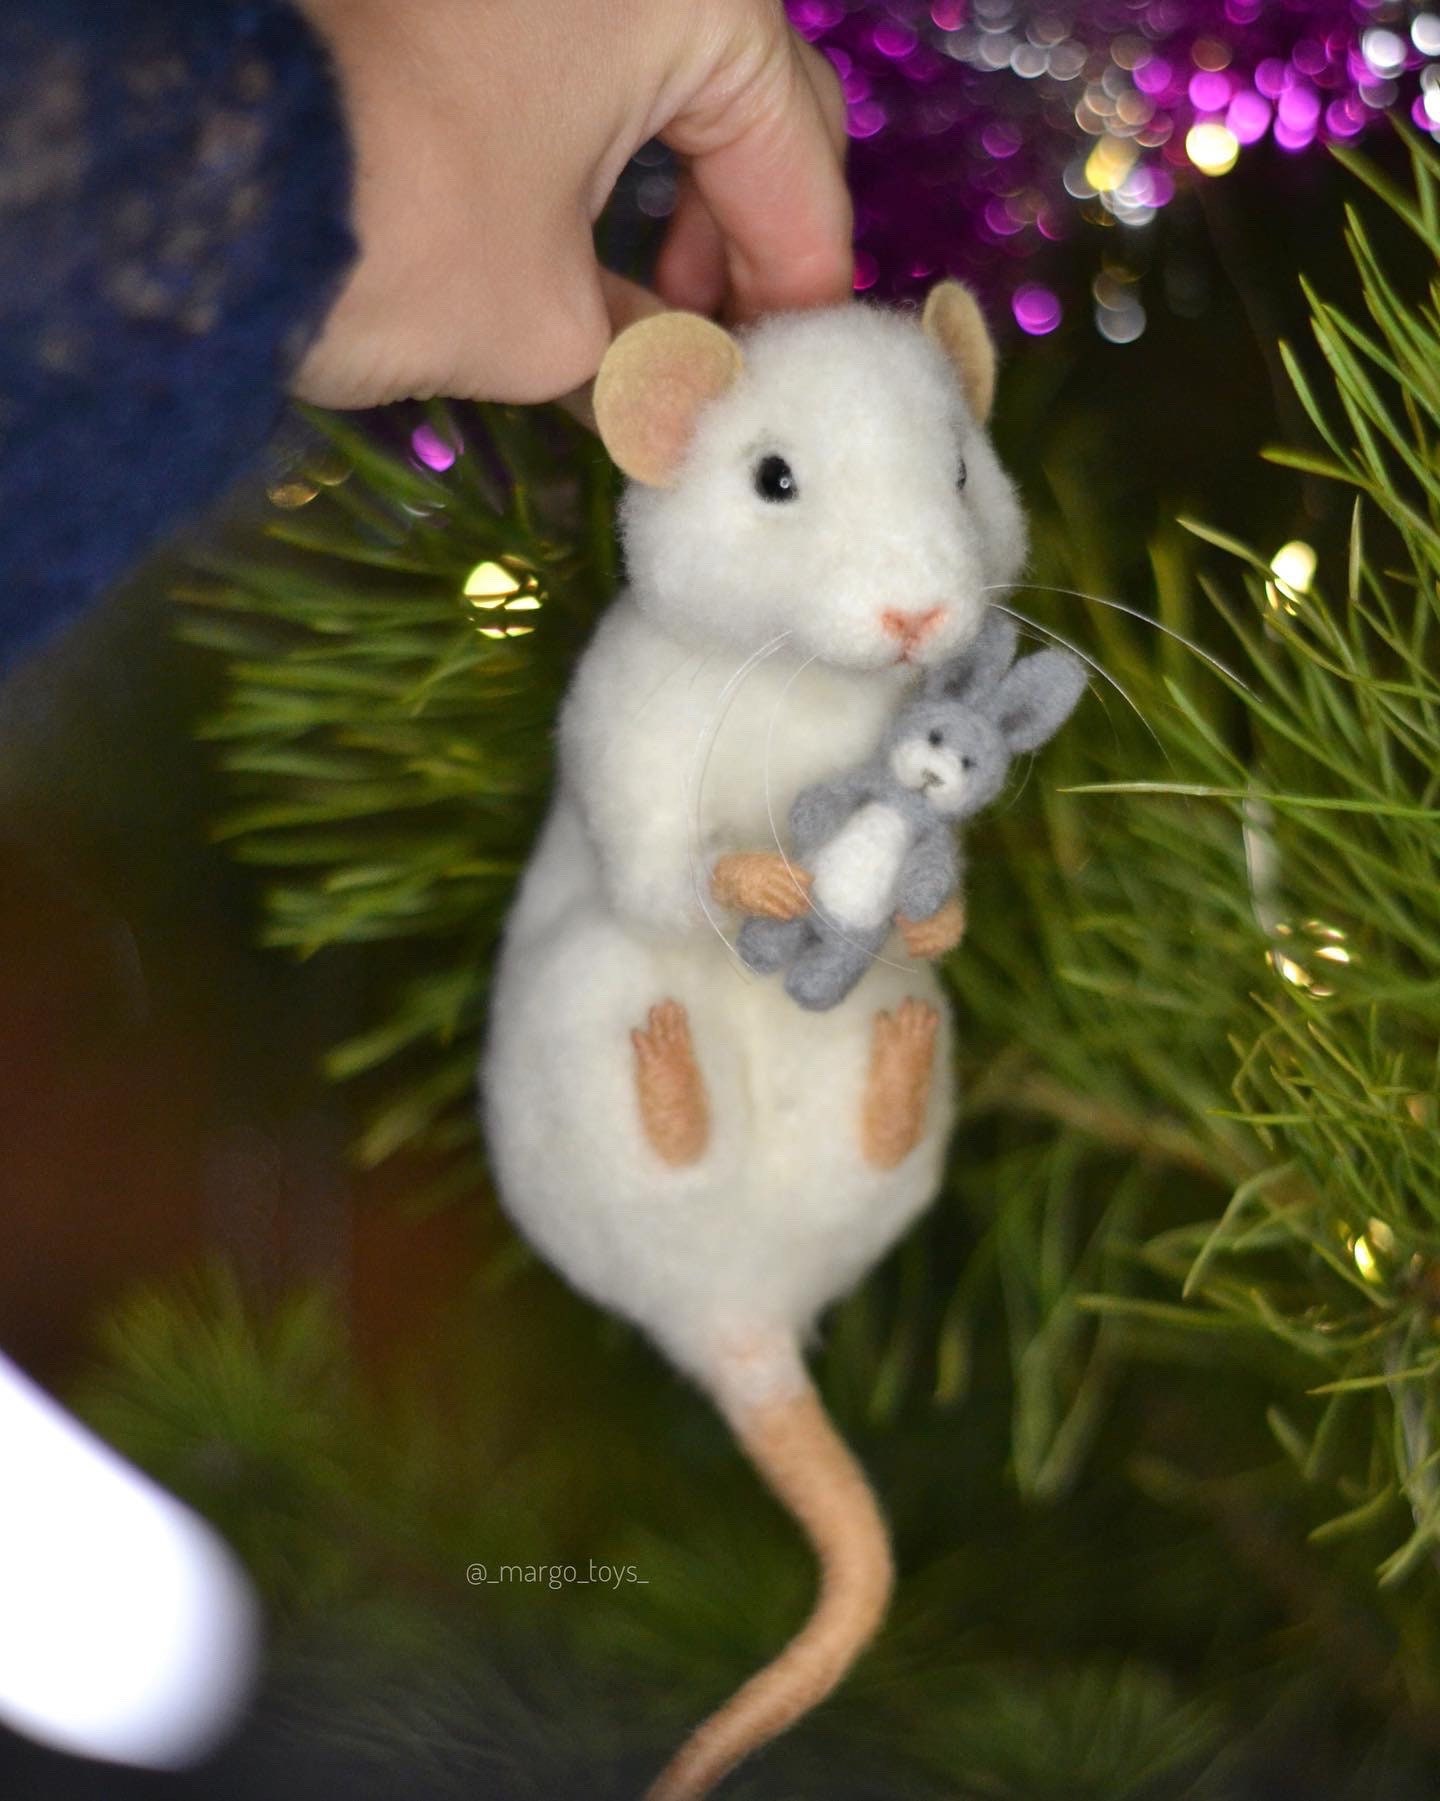 Needle Felted Mouse Little Mice White Mouse Felted Animal Mouse Filtz Felted  Miniature Wool Mouse Felt Sculpture Mouse Eco Toy 